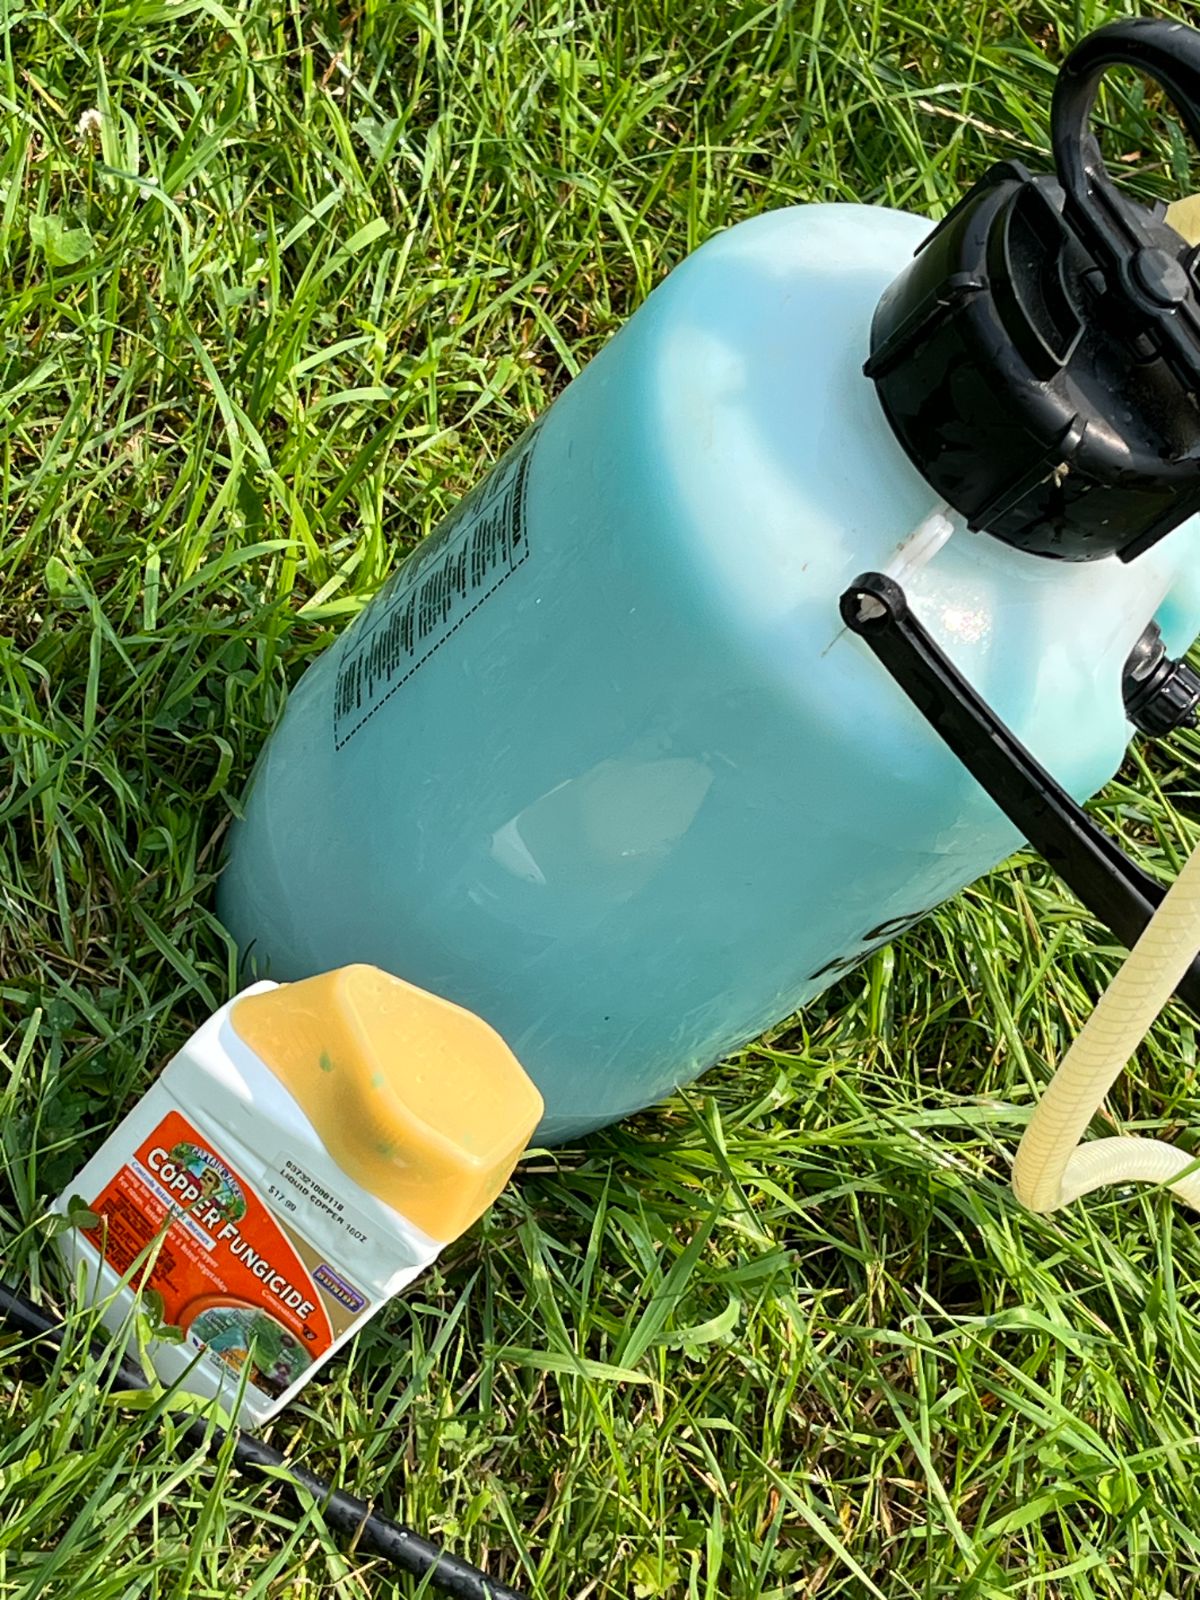 A two gallon garden sprayer for applying organic insecticide